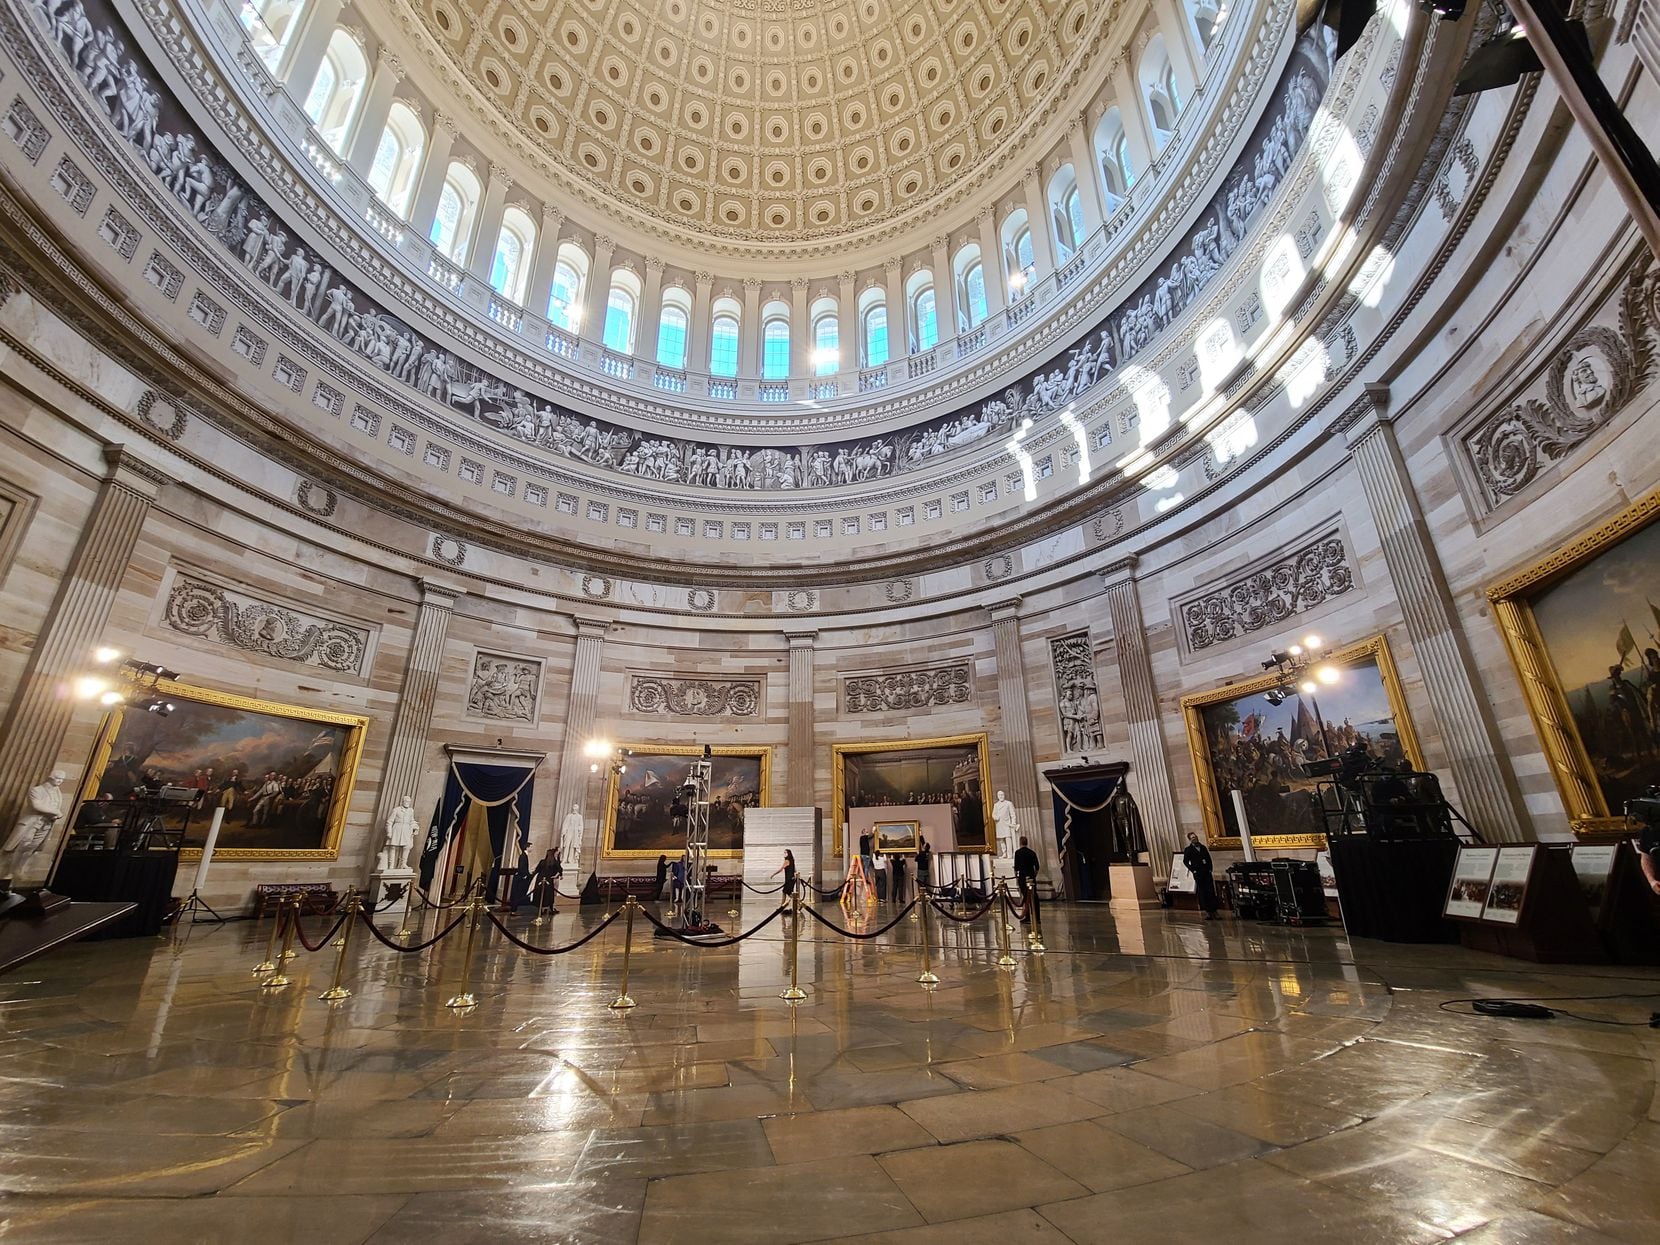 With security tight, the U.S. Capitol Rotunda was empty on Tuesday, the day before Joe Biden's inauguration as the 46th president.